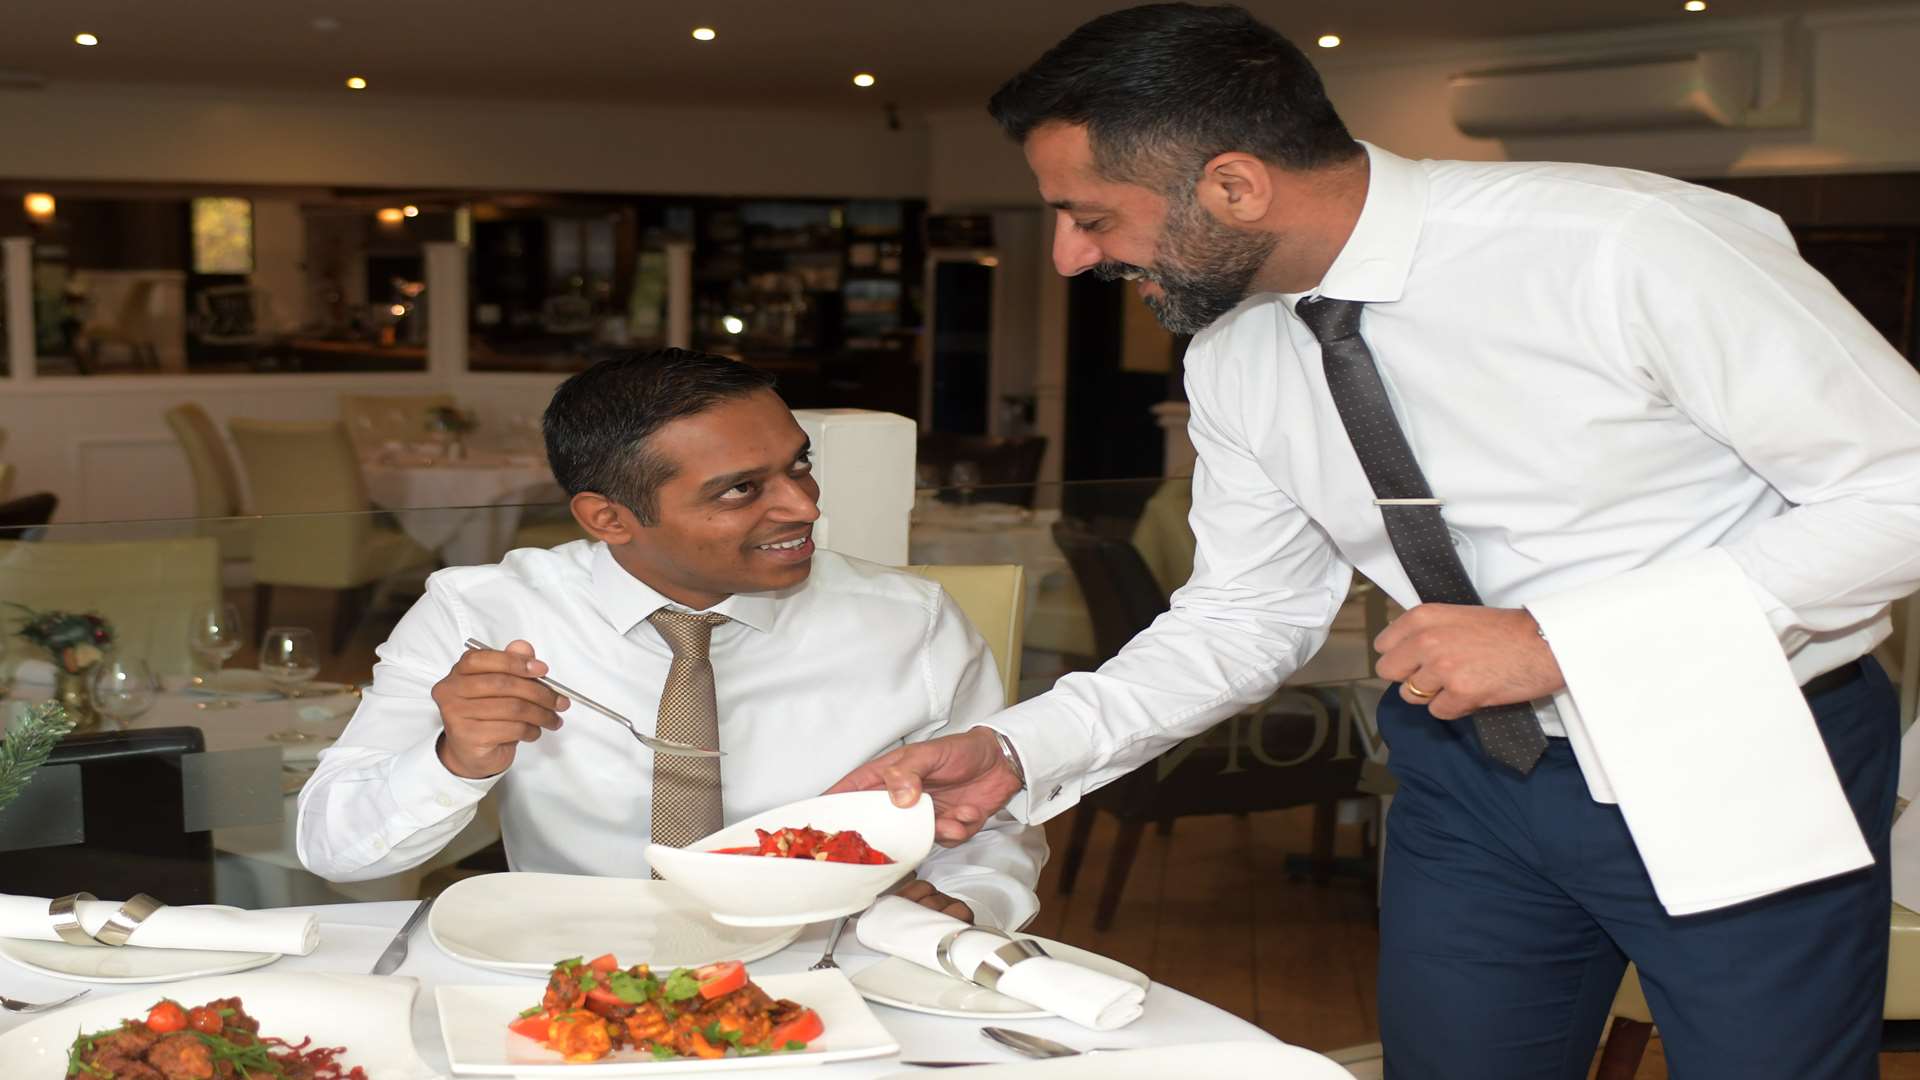 Habib Siddiq of Cinnamon Square, left, is served one of his own dishes by Sukh Majhail from Royal Bank of Scotland